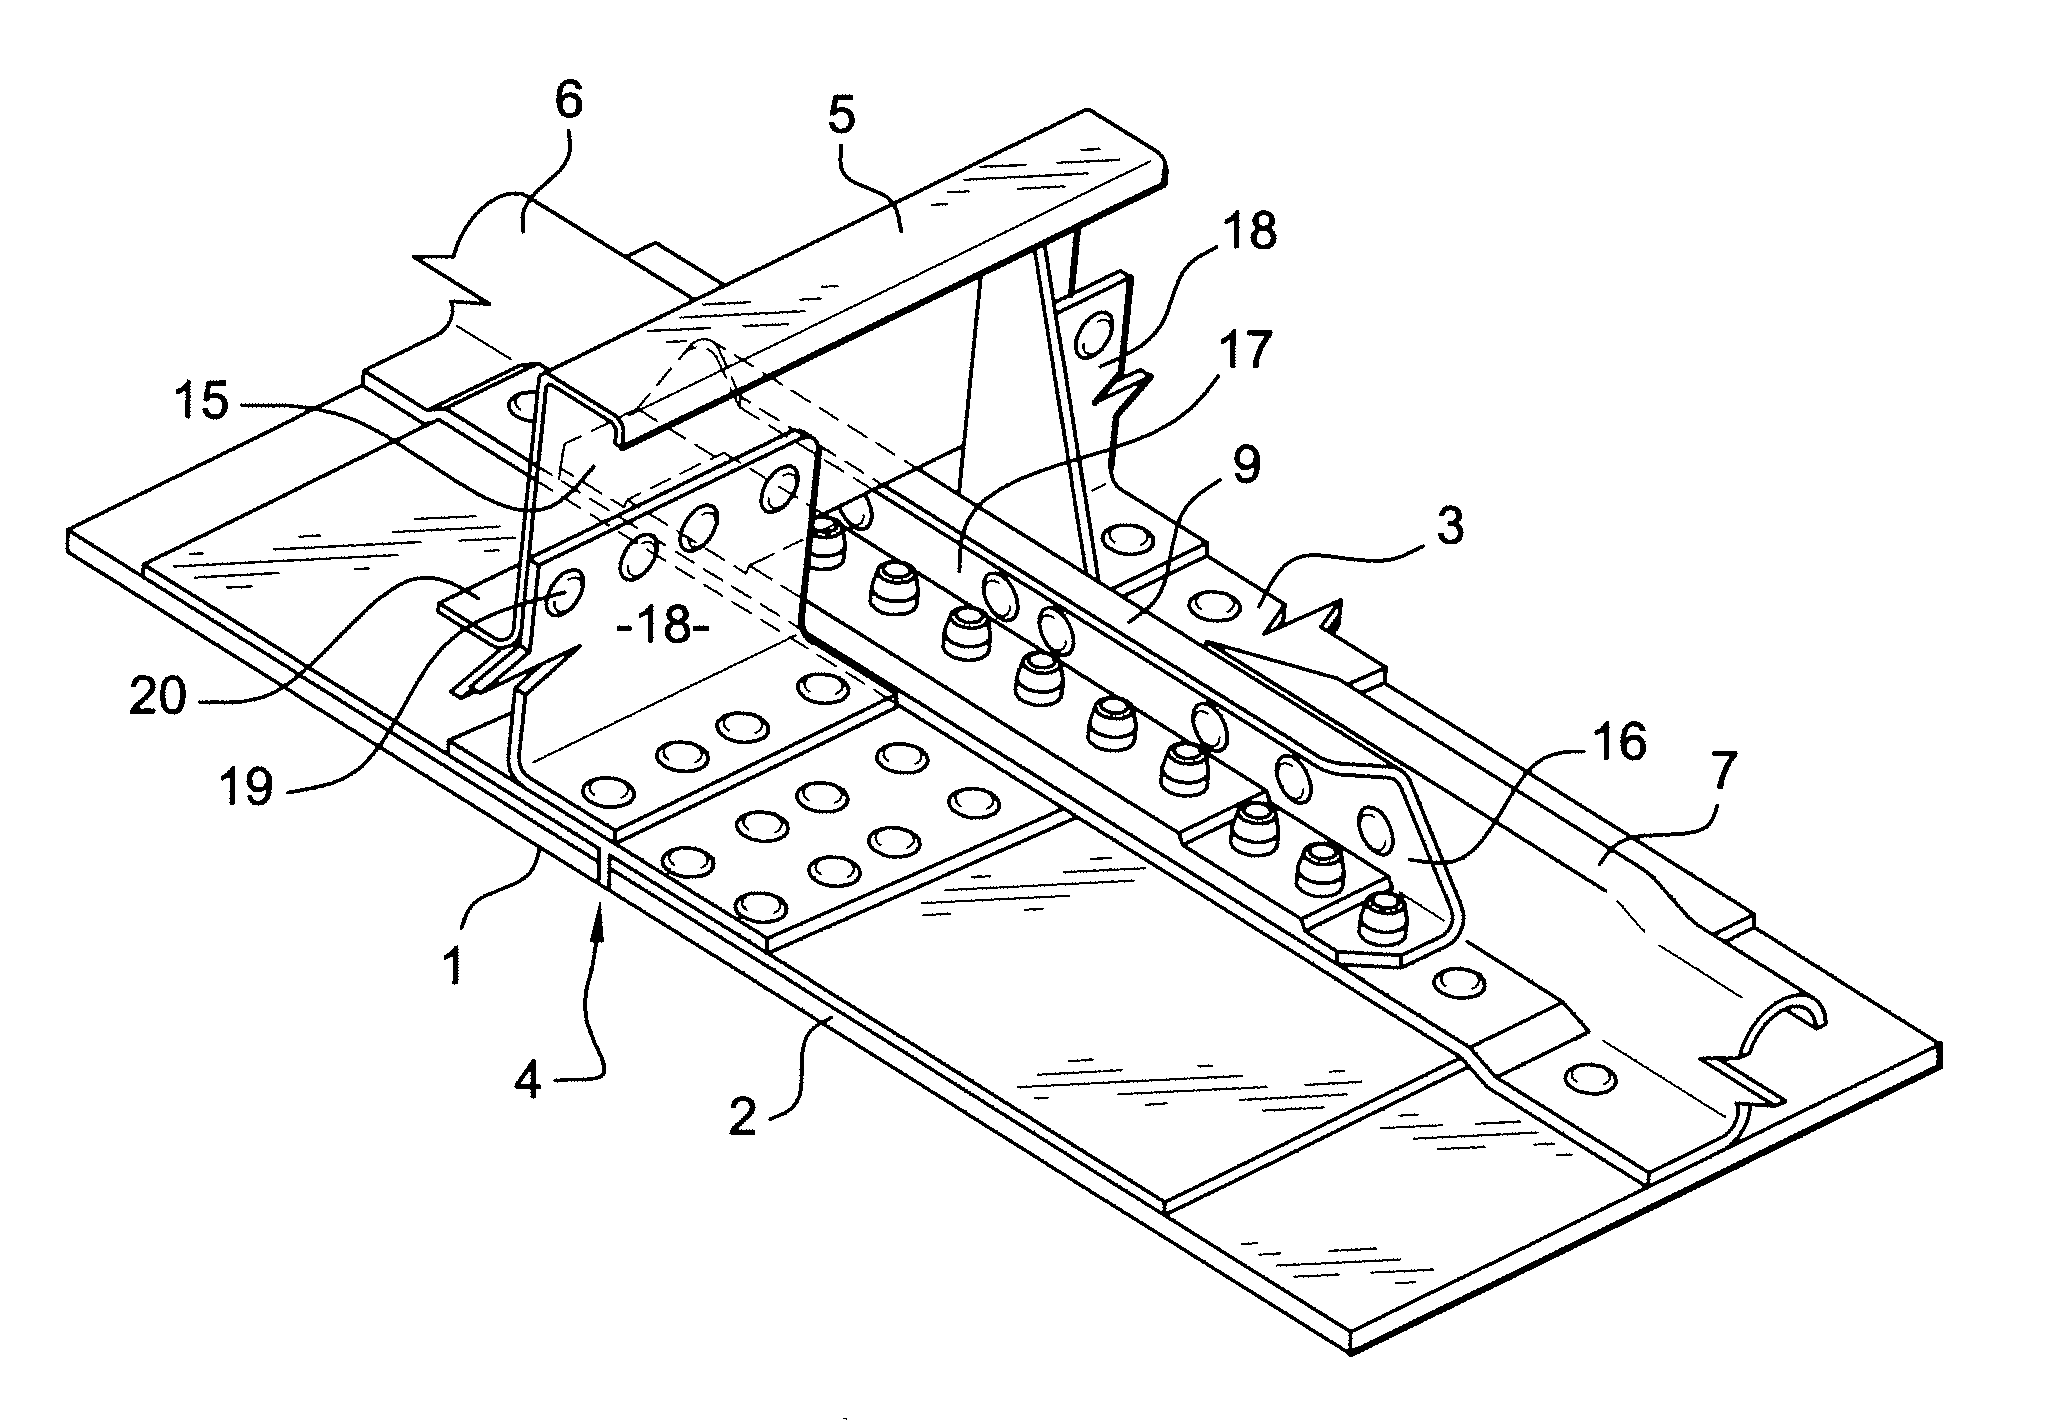 Splice plate for stringers and orbital joining device